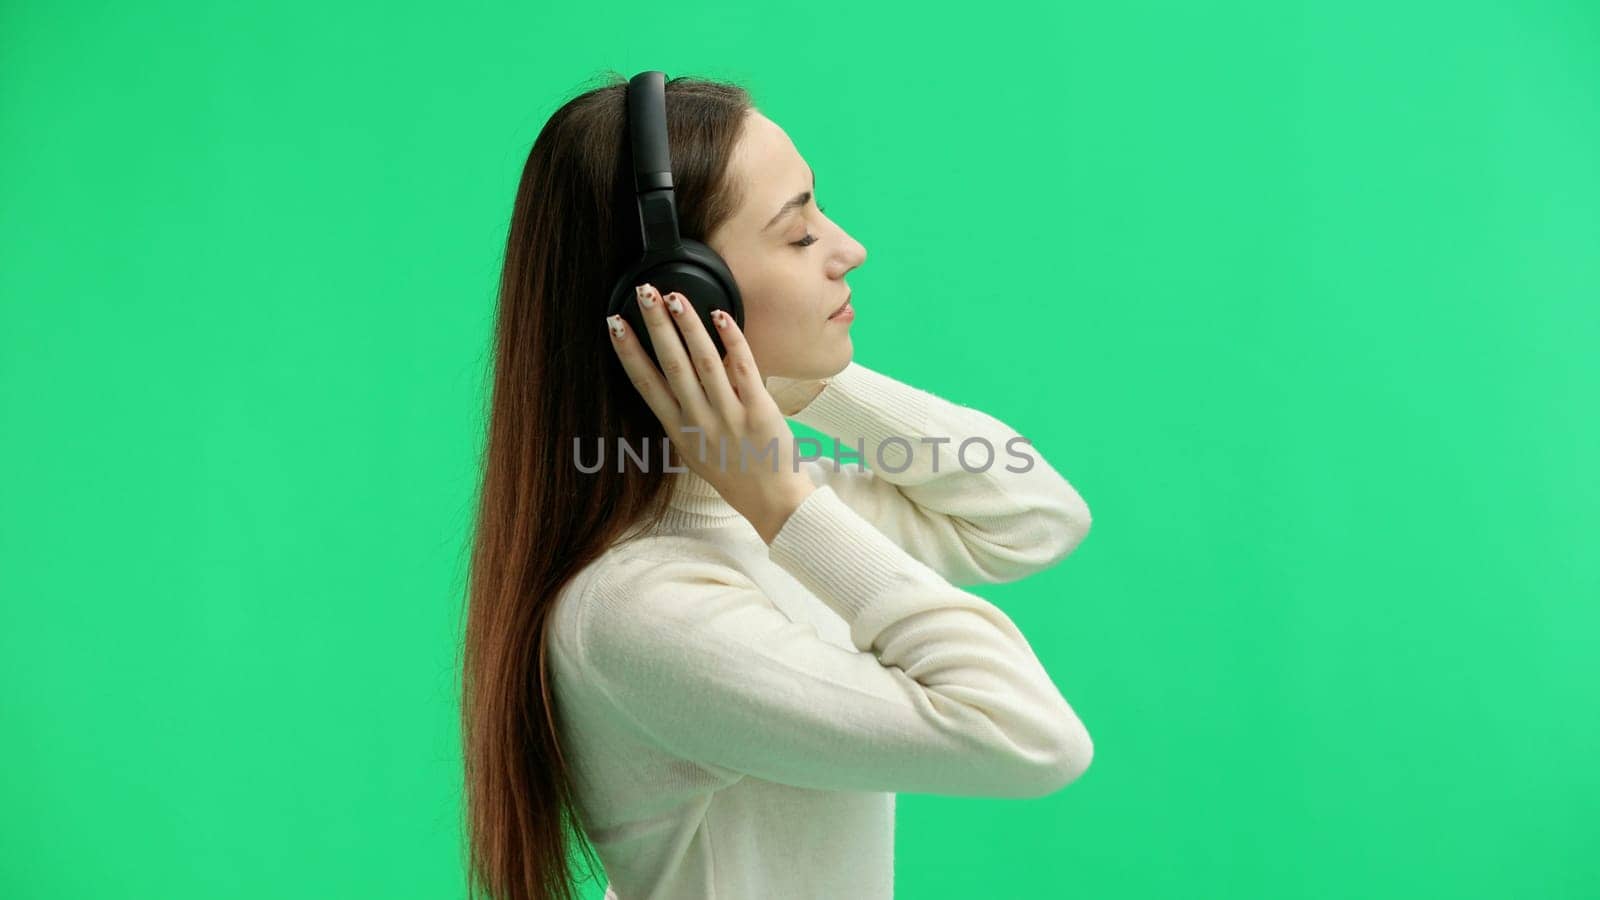 A woman, close-up, on a green background, listening to music with headphones.